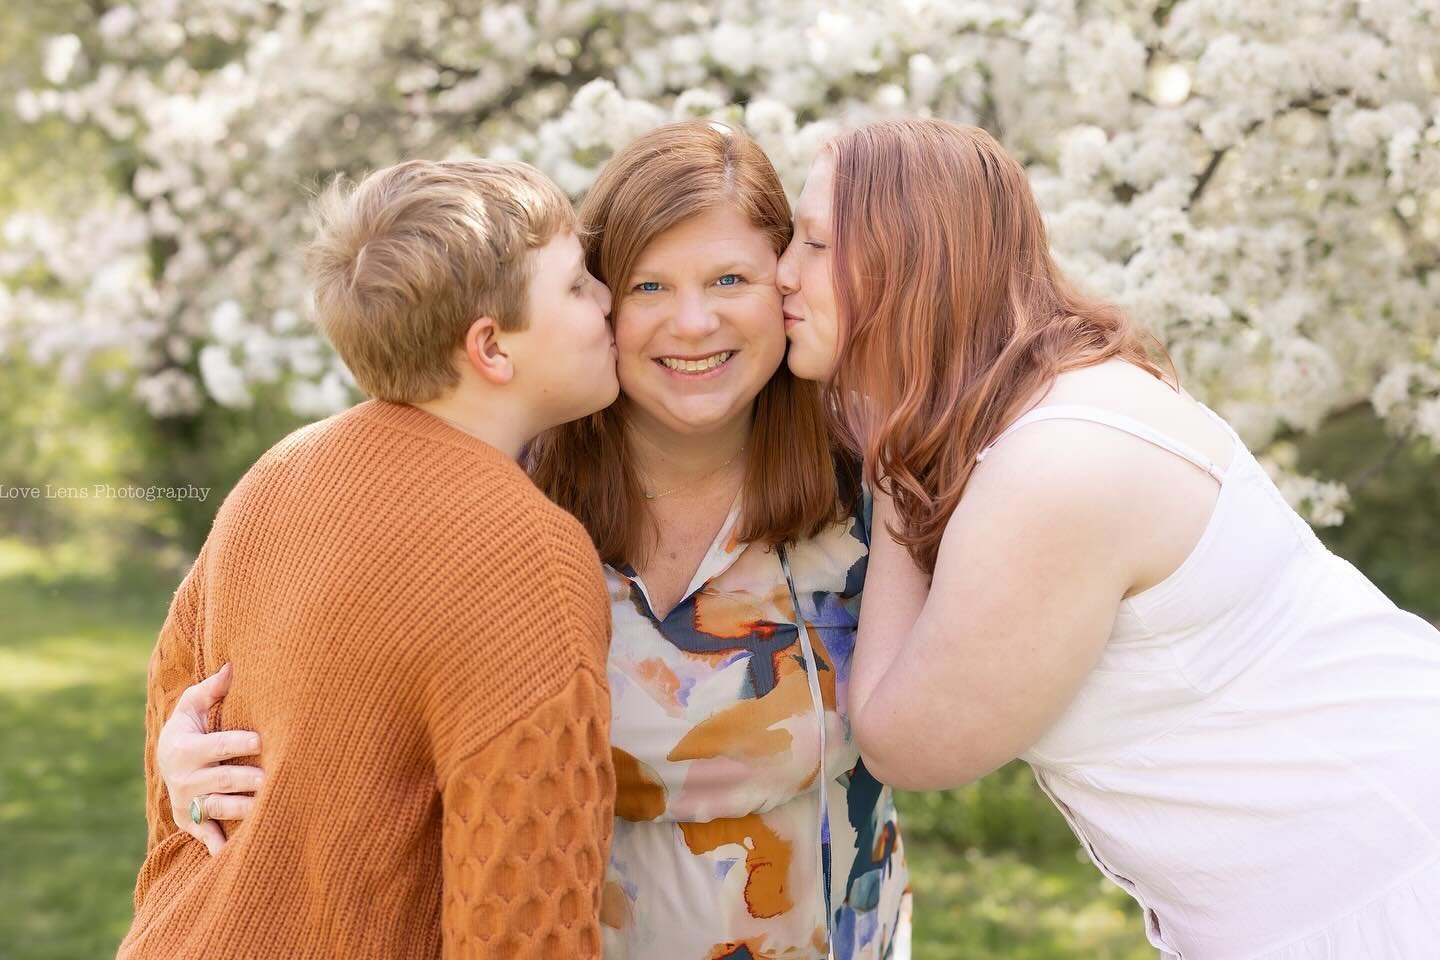 Spring mini sessions are almost ready!! Thank you to the families who participated and gave back to Isaiah House
 in the process. Love these smoochy pics from that day - usually with lots of giggling. Stay tuned for more!! 
#livelovelens